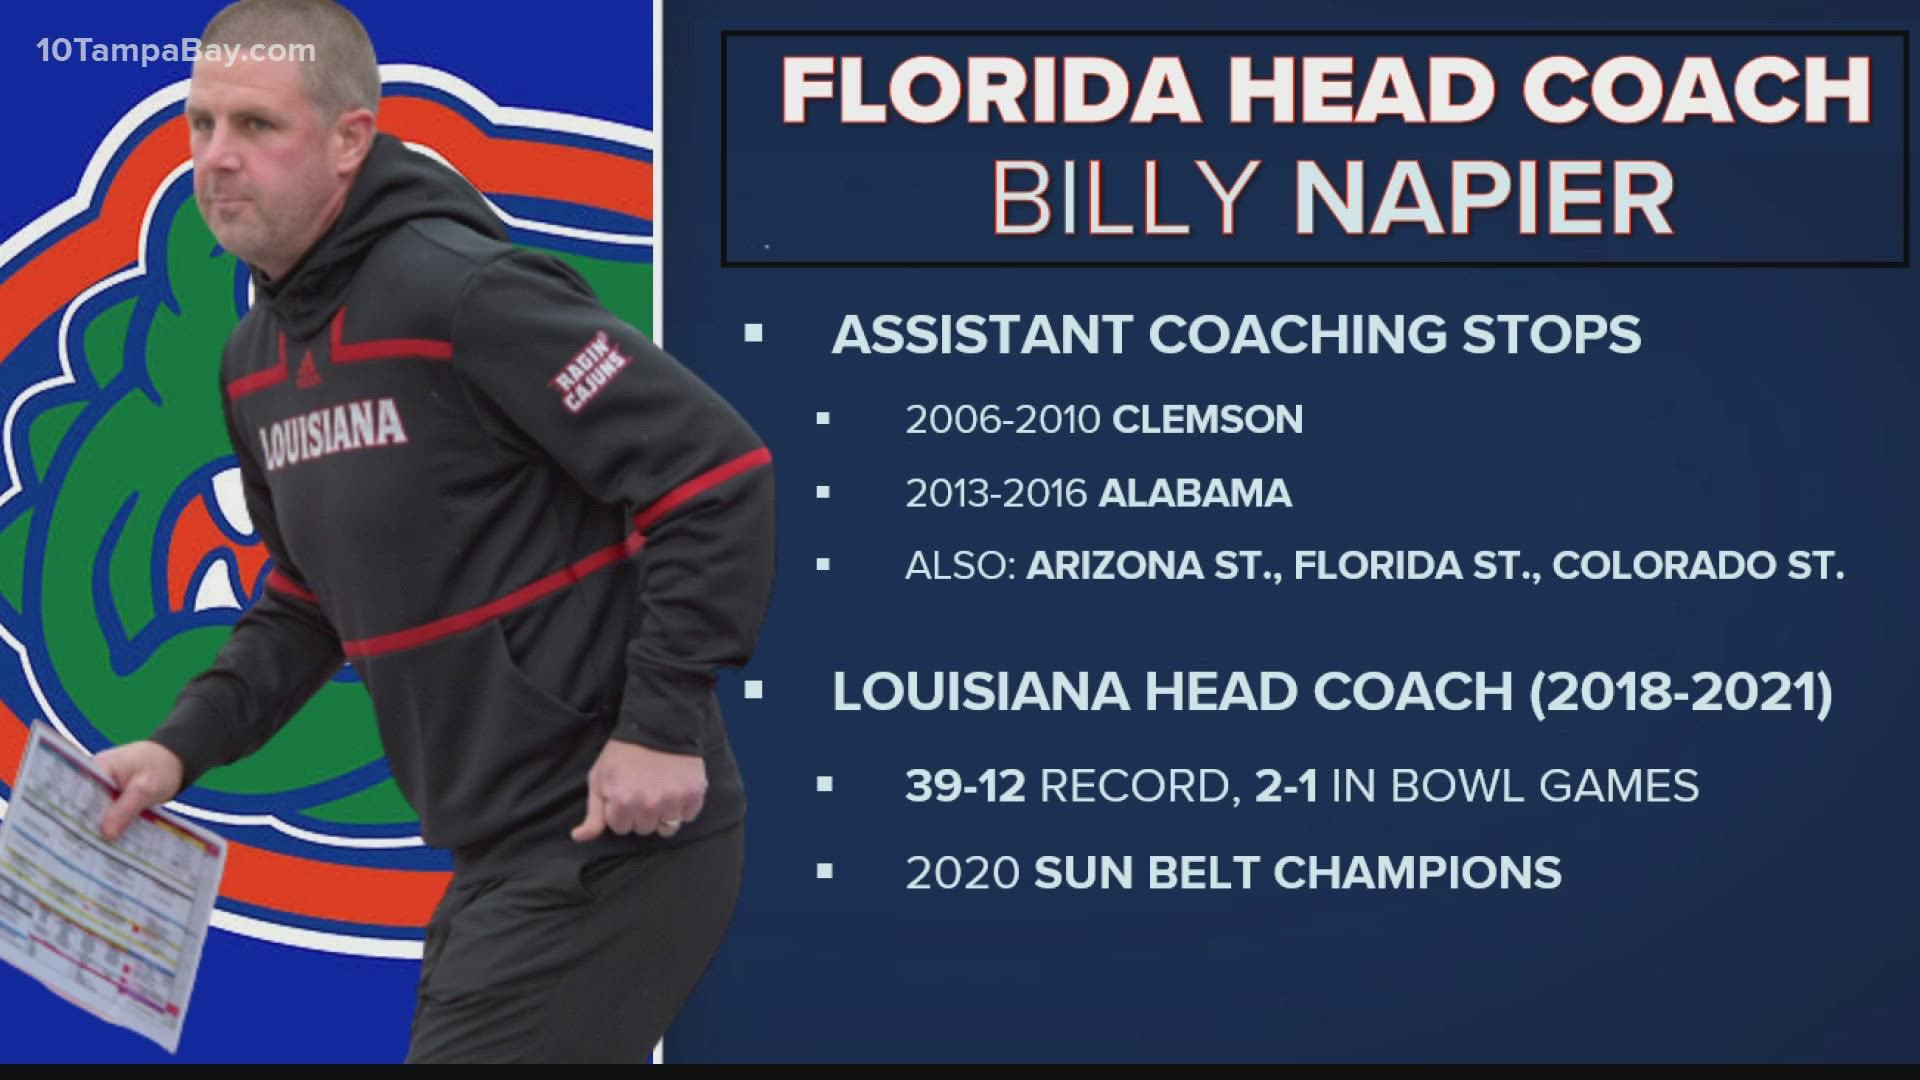 UF welcomes head coach Billy Napier to lead football program 